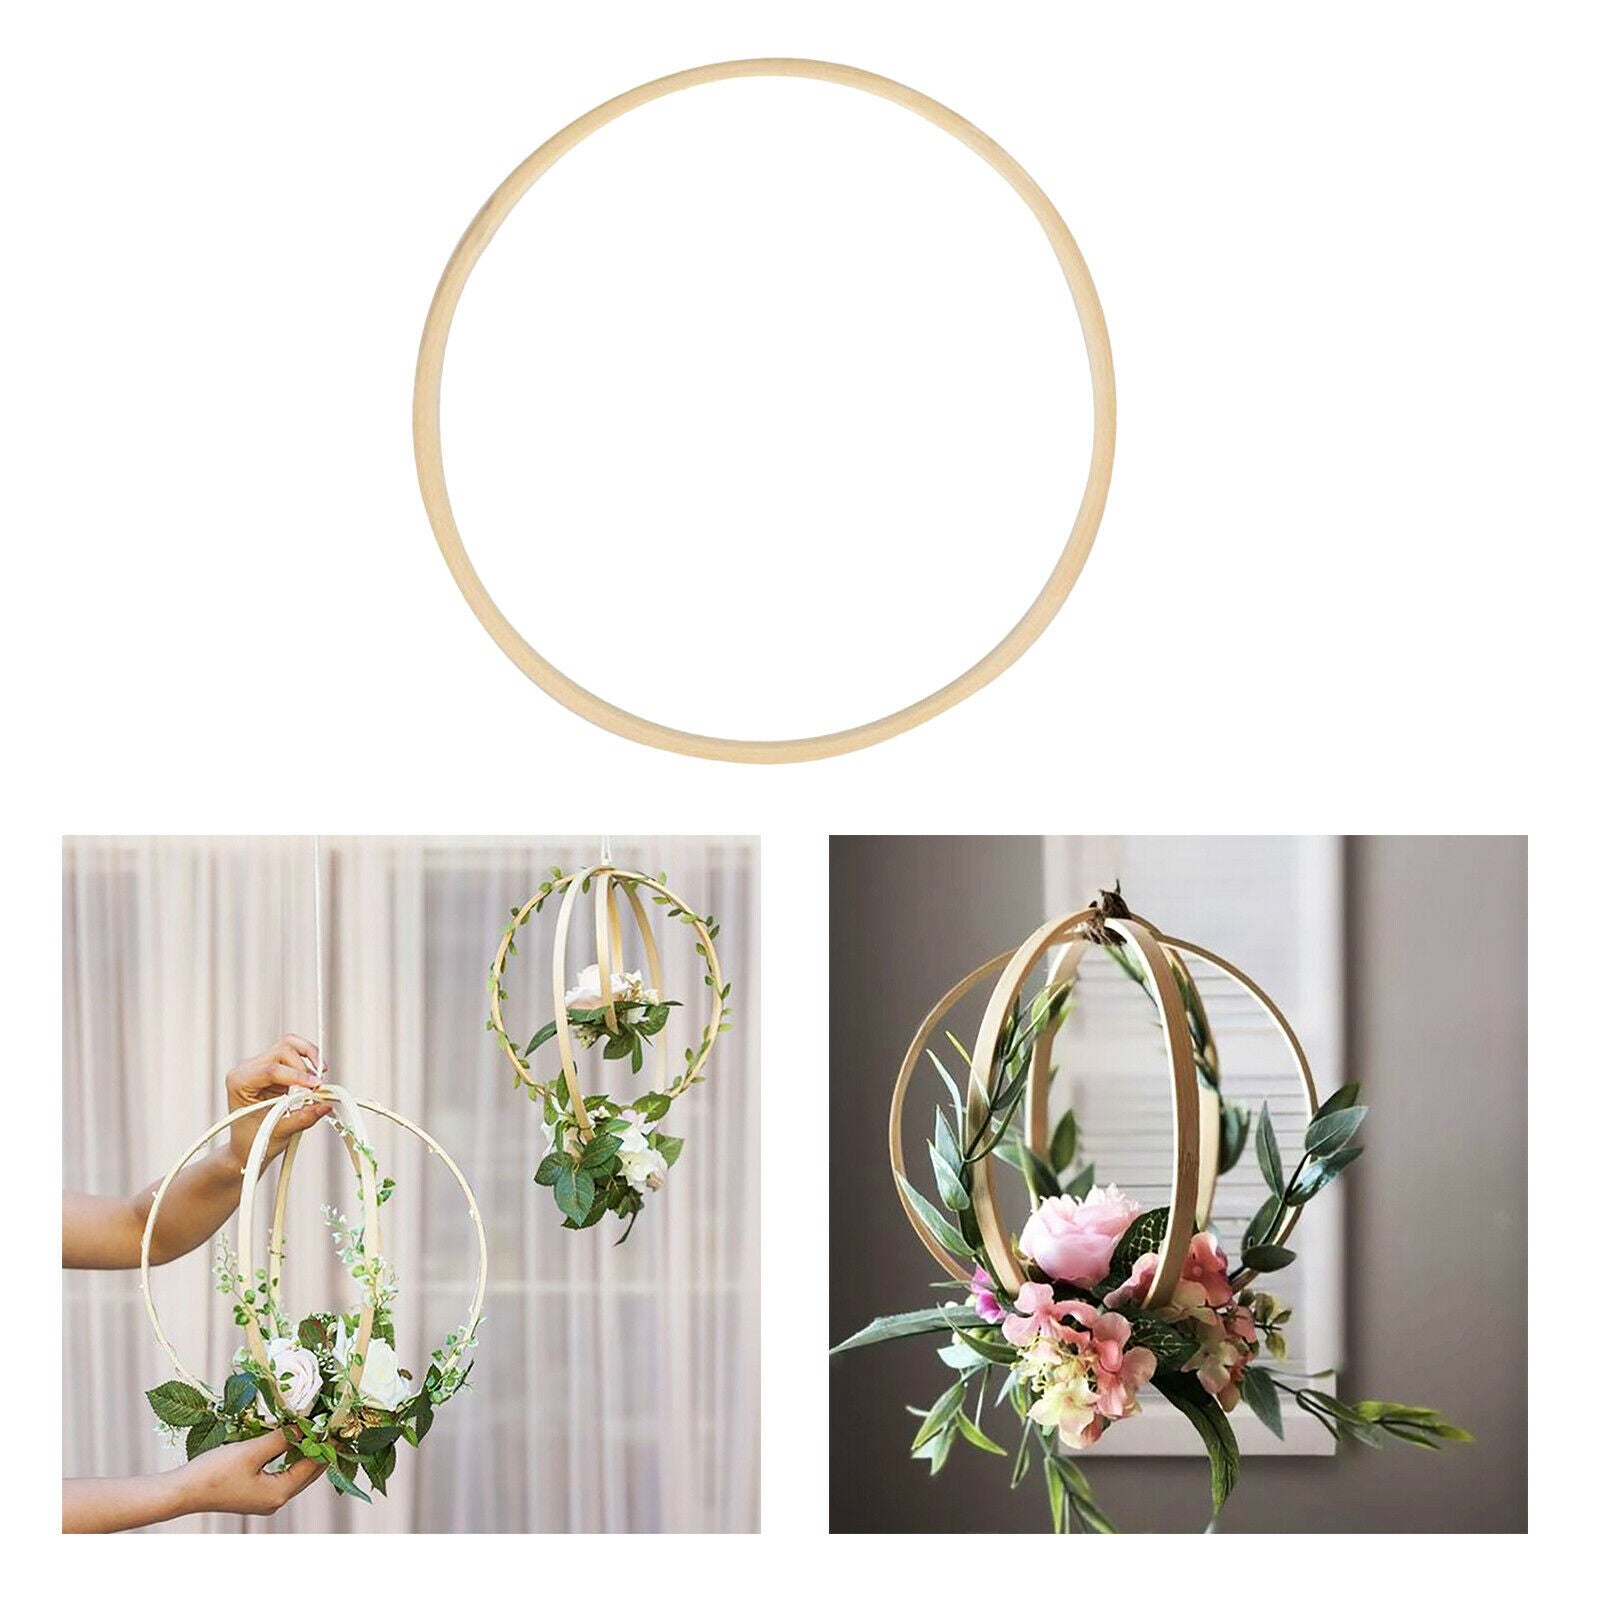 2x Embroidery Hoops Macrame Ring for DIY Art Craft Dream Catcher Wedding Home